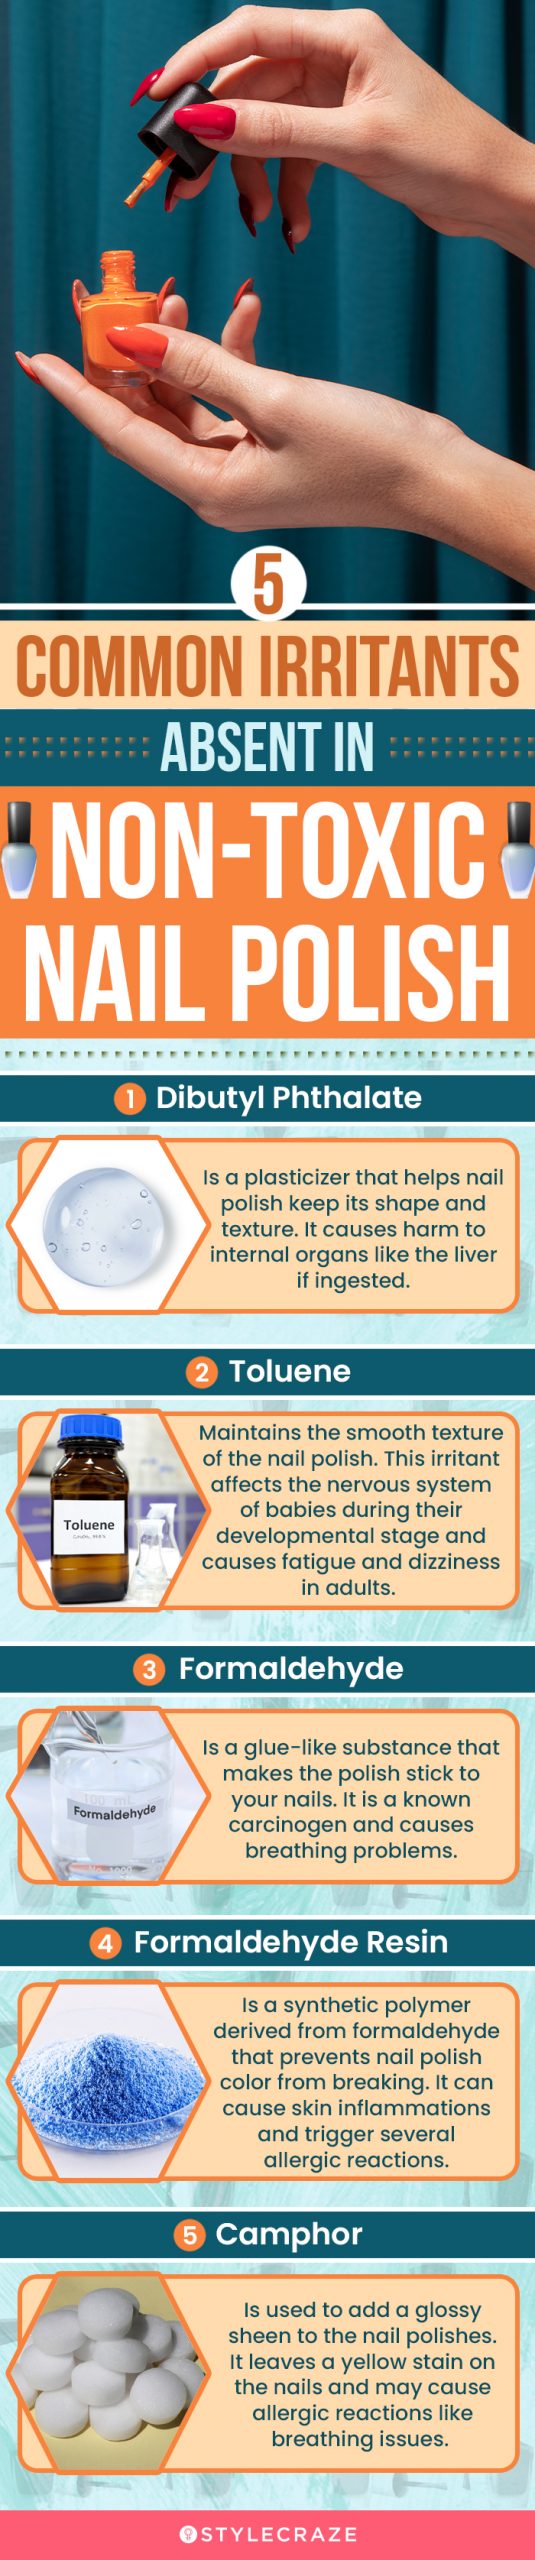 Common Irritants Not Found In Non-Toxic Nail Polish (infographic)